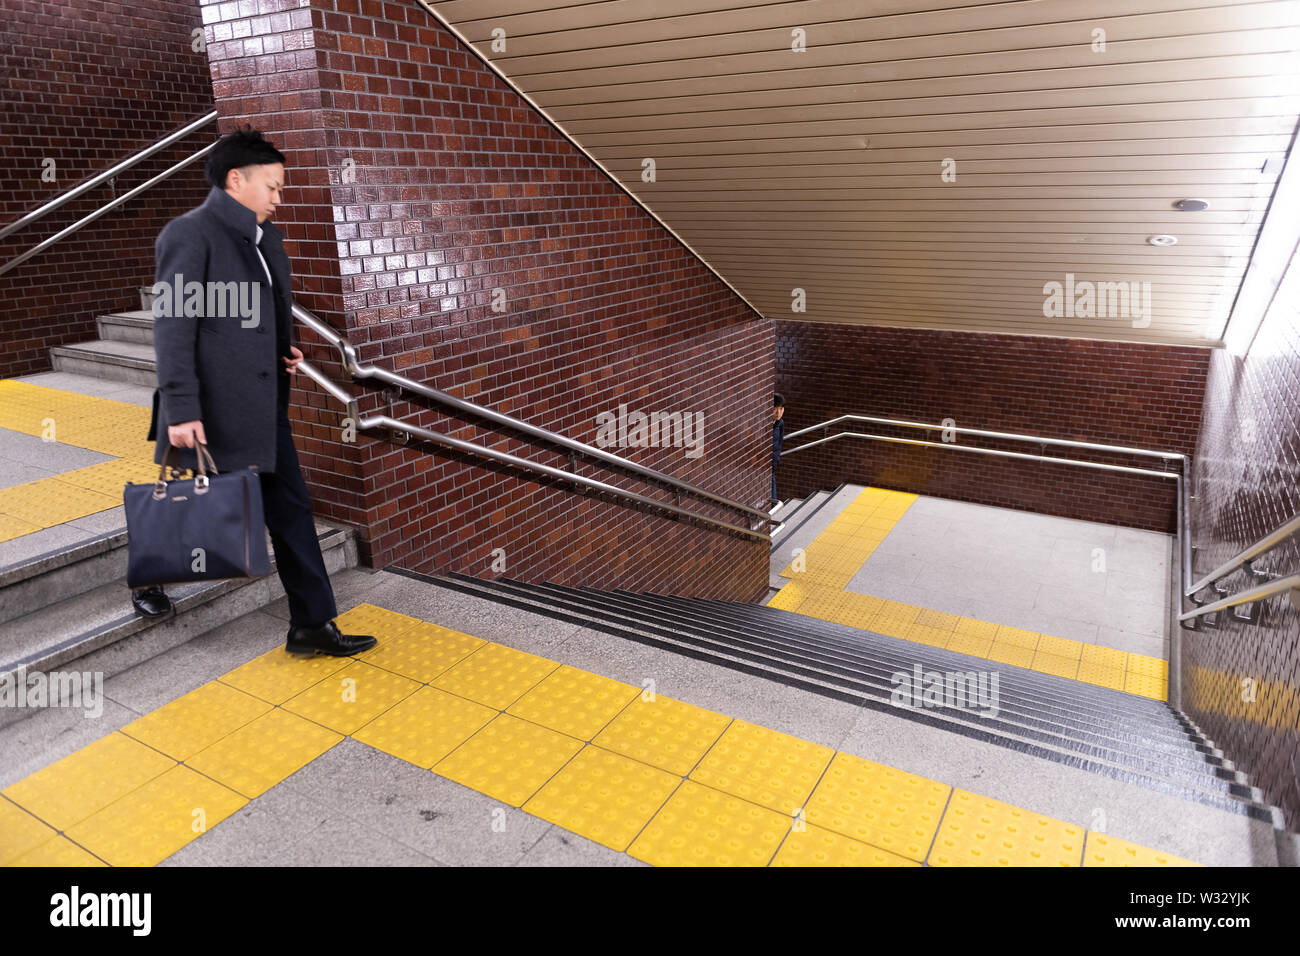 Tokyo, Japan - April 4, 2019: Underground staircase stairs or steps with Japanese businessman with metal railing in Shinjuku train station Stock Photo